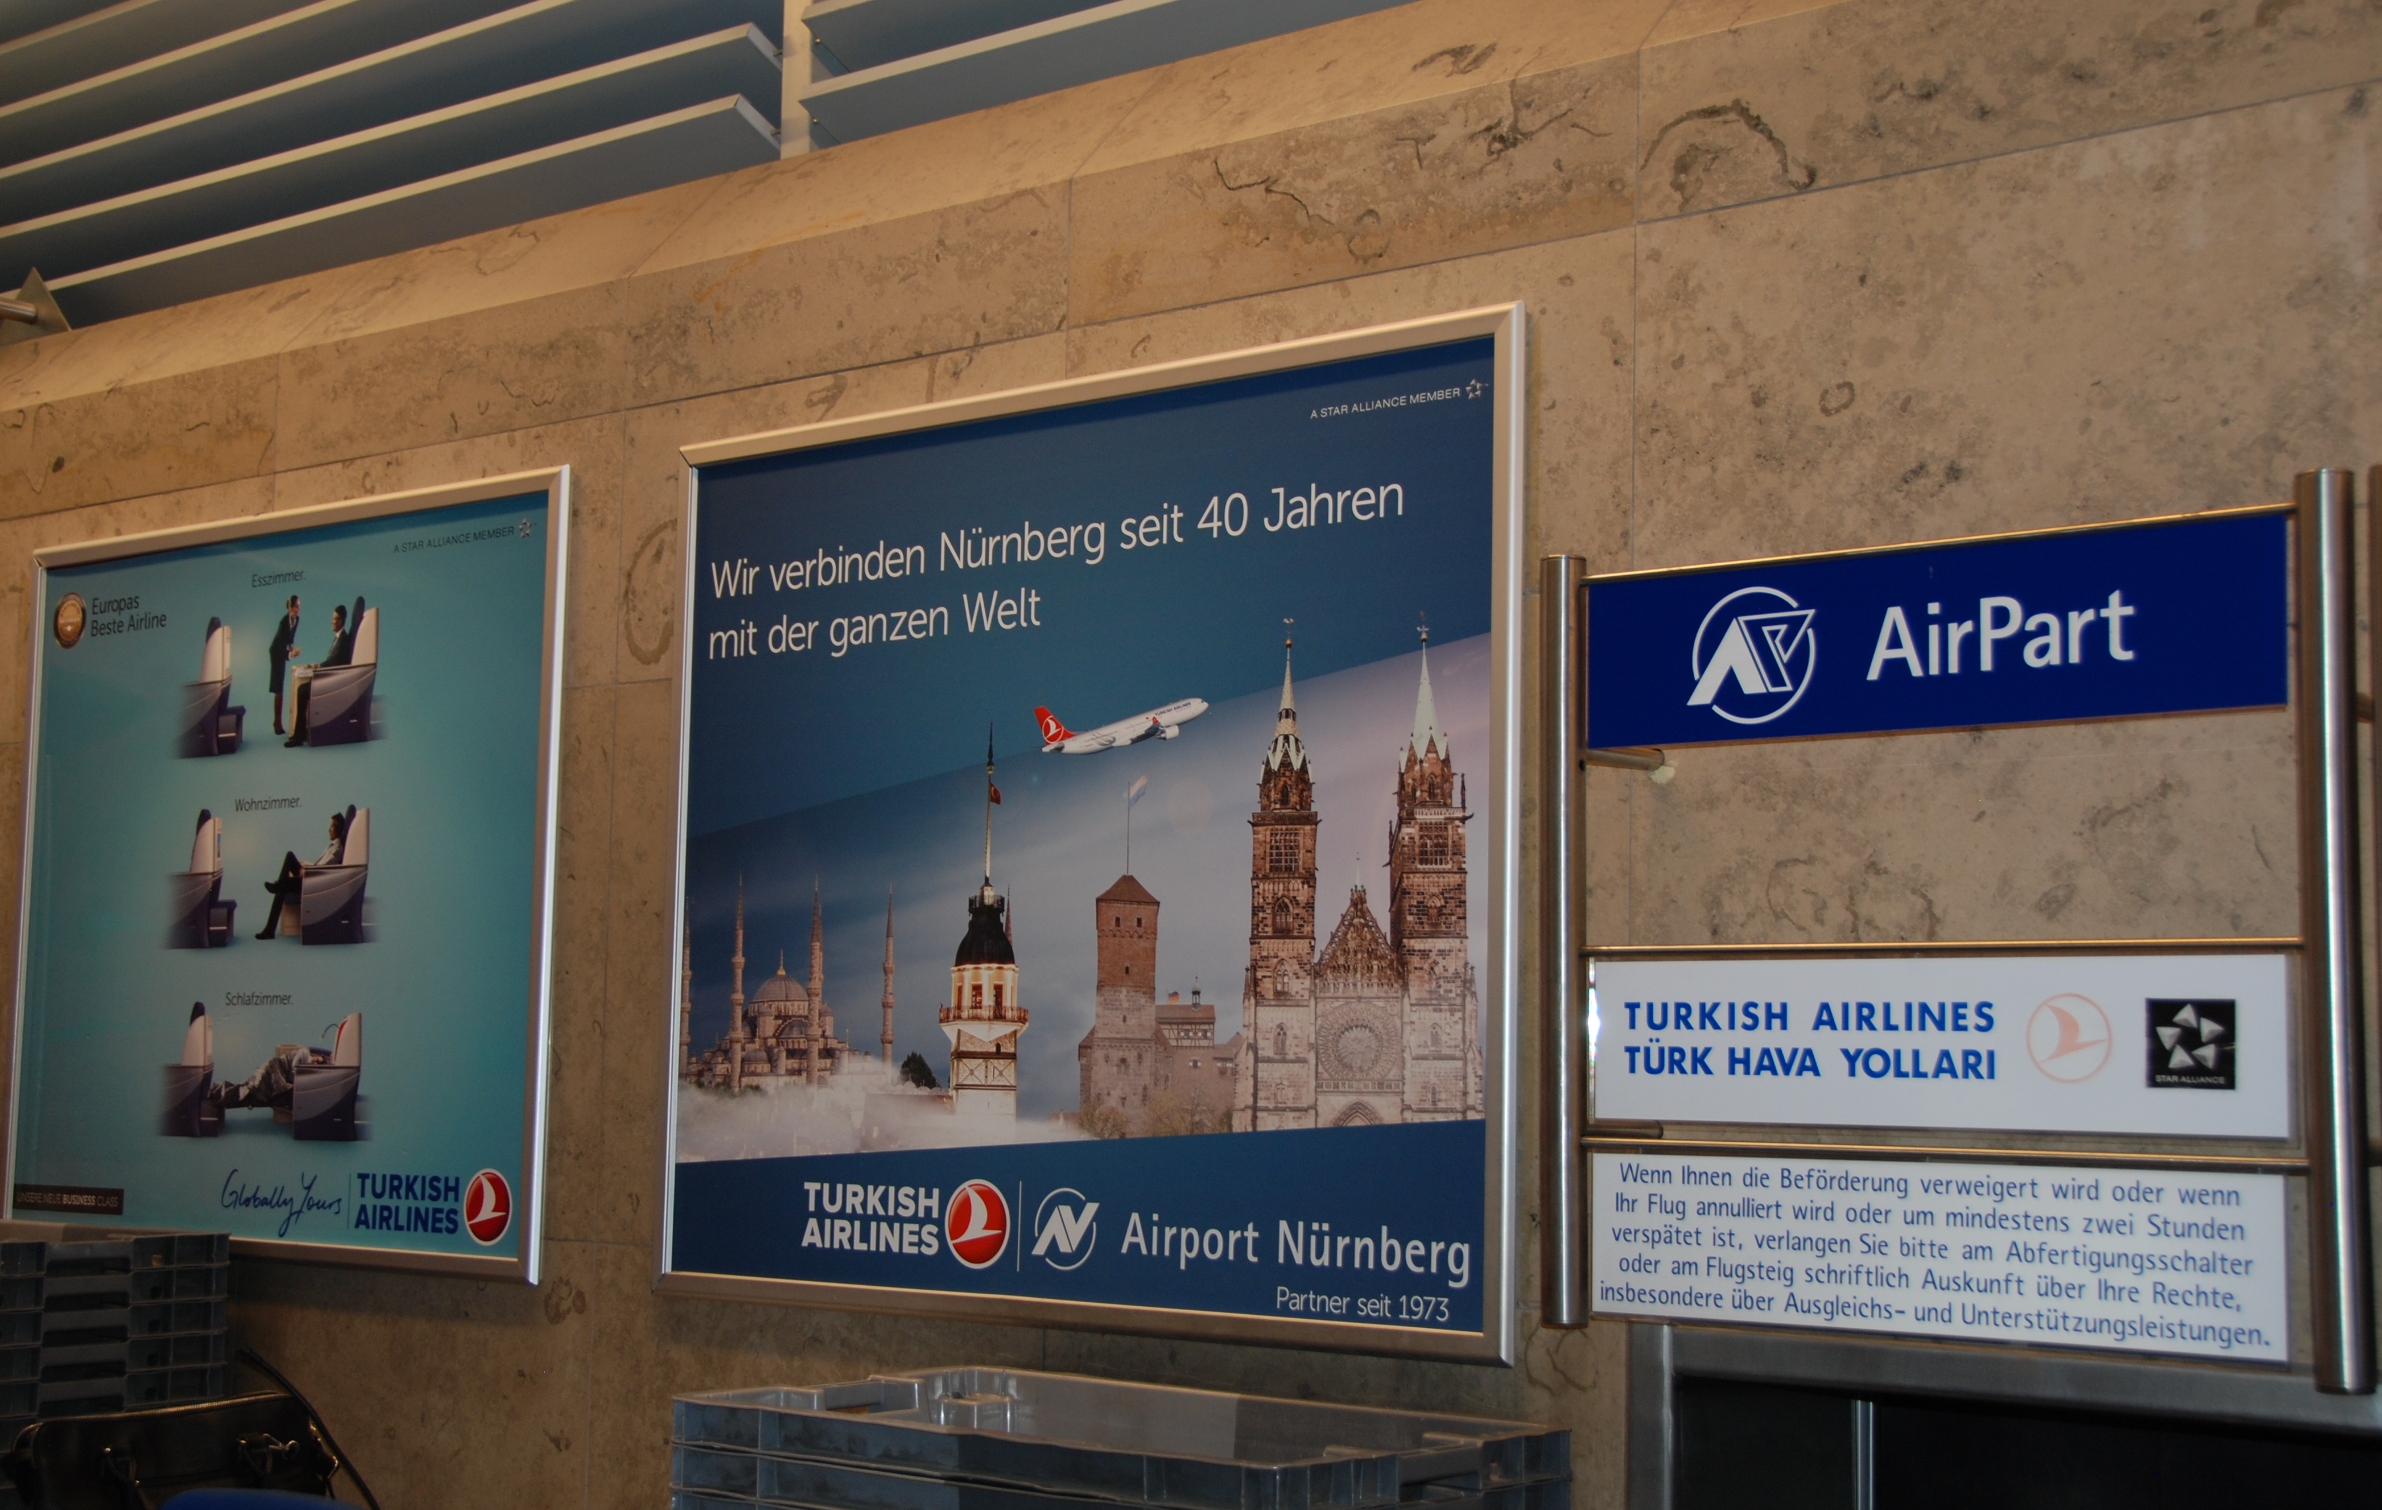 Turkish Airlines Ad @ Nürnberg Airport